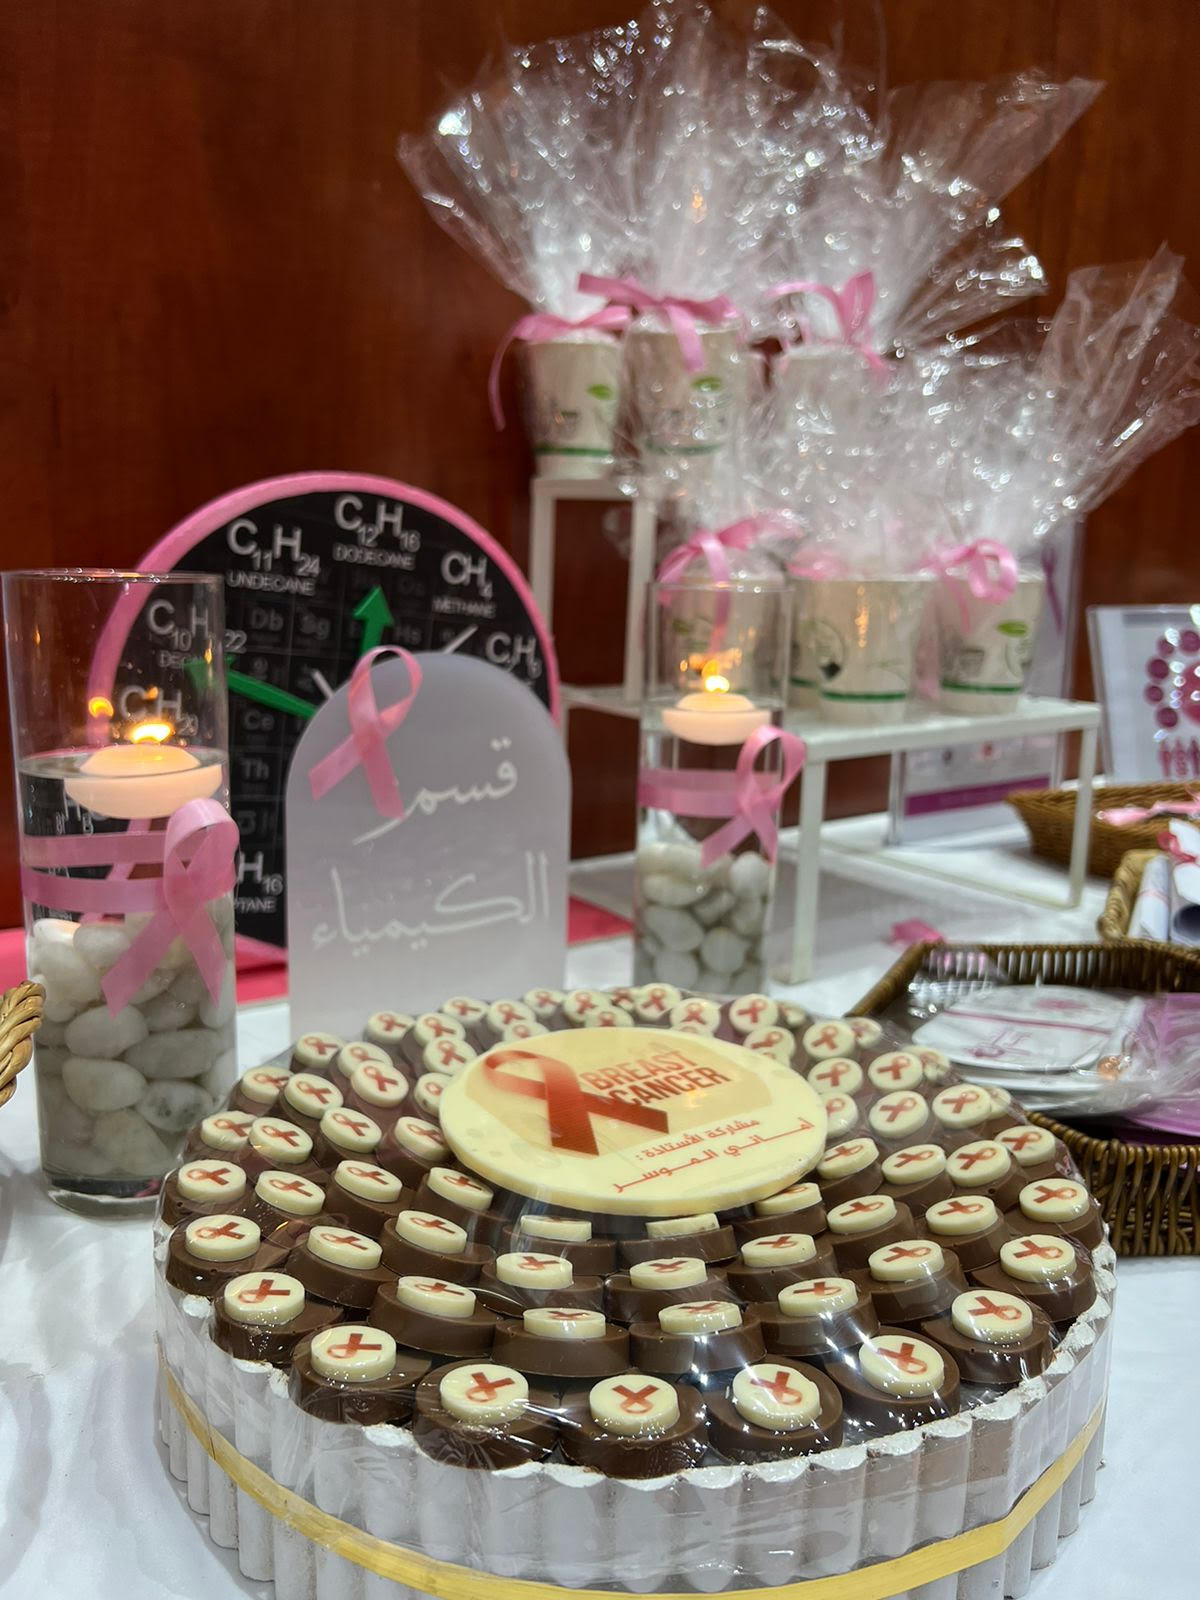 The Girls College Complex in Qurayyat holds a breast cancer awareness event in 2023